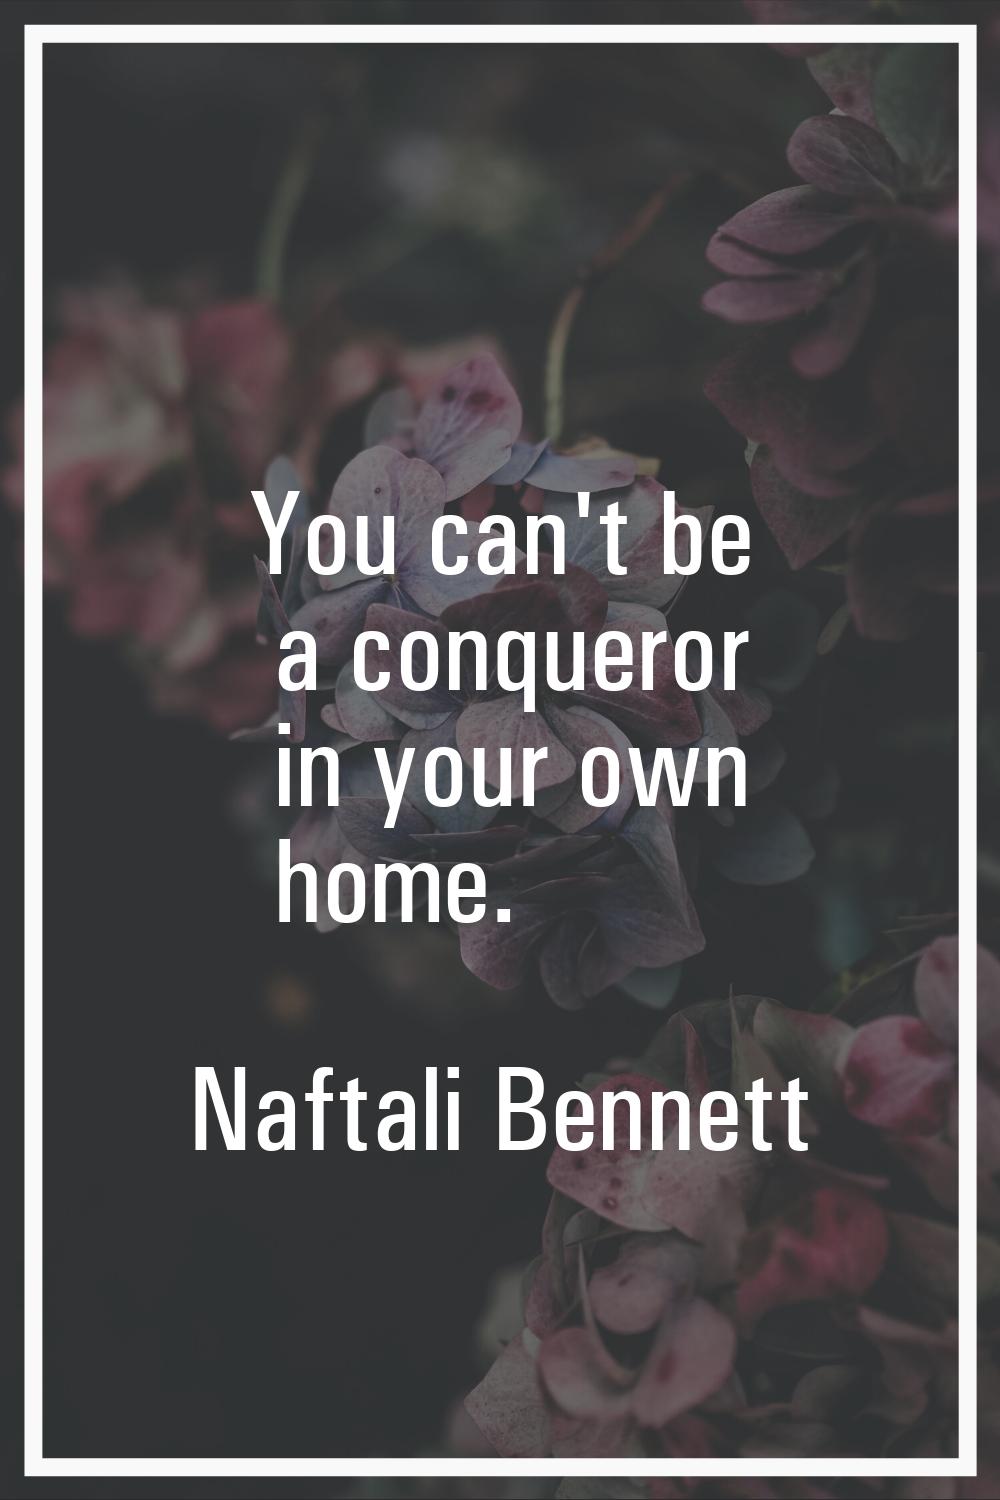 You can't be a conqueror in your own home.